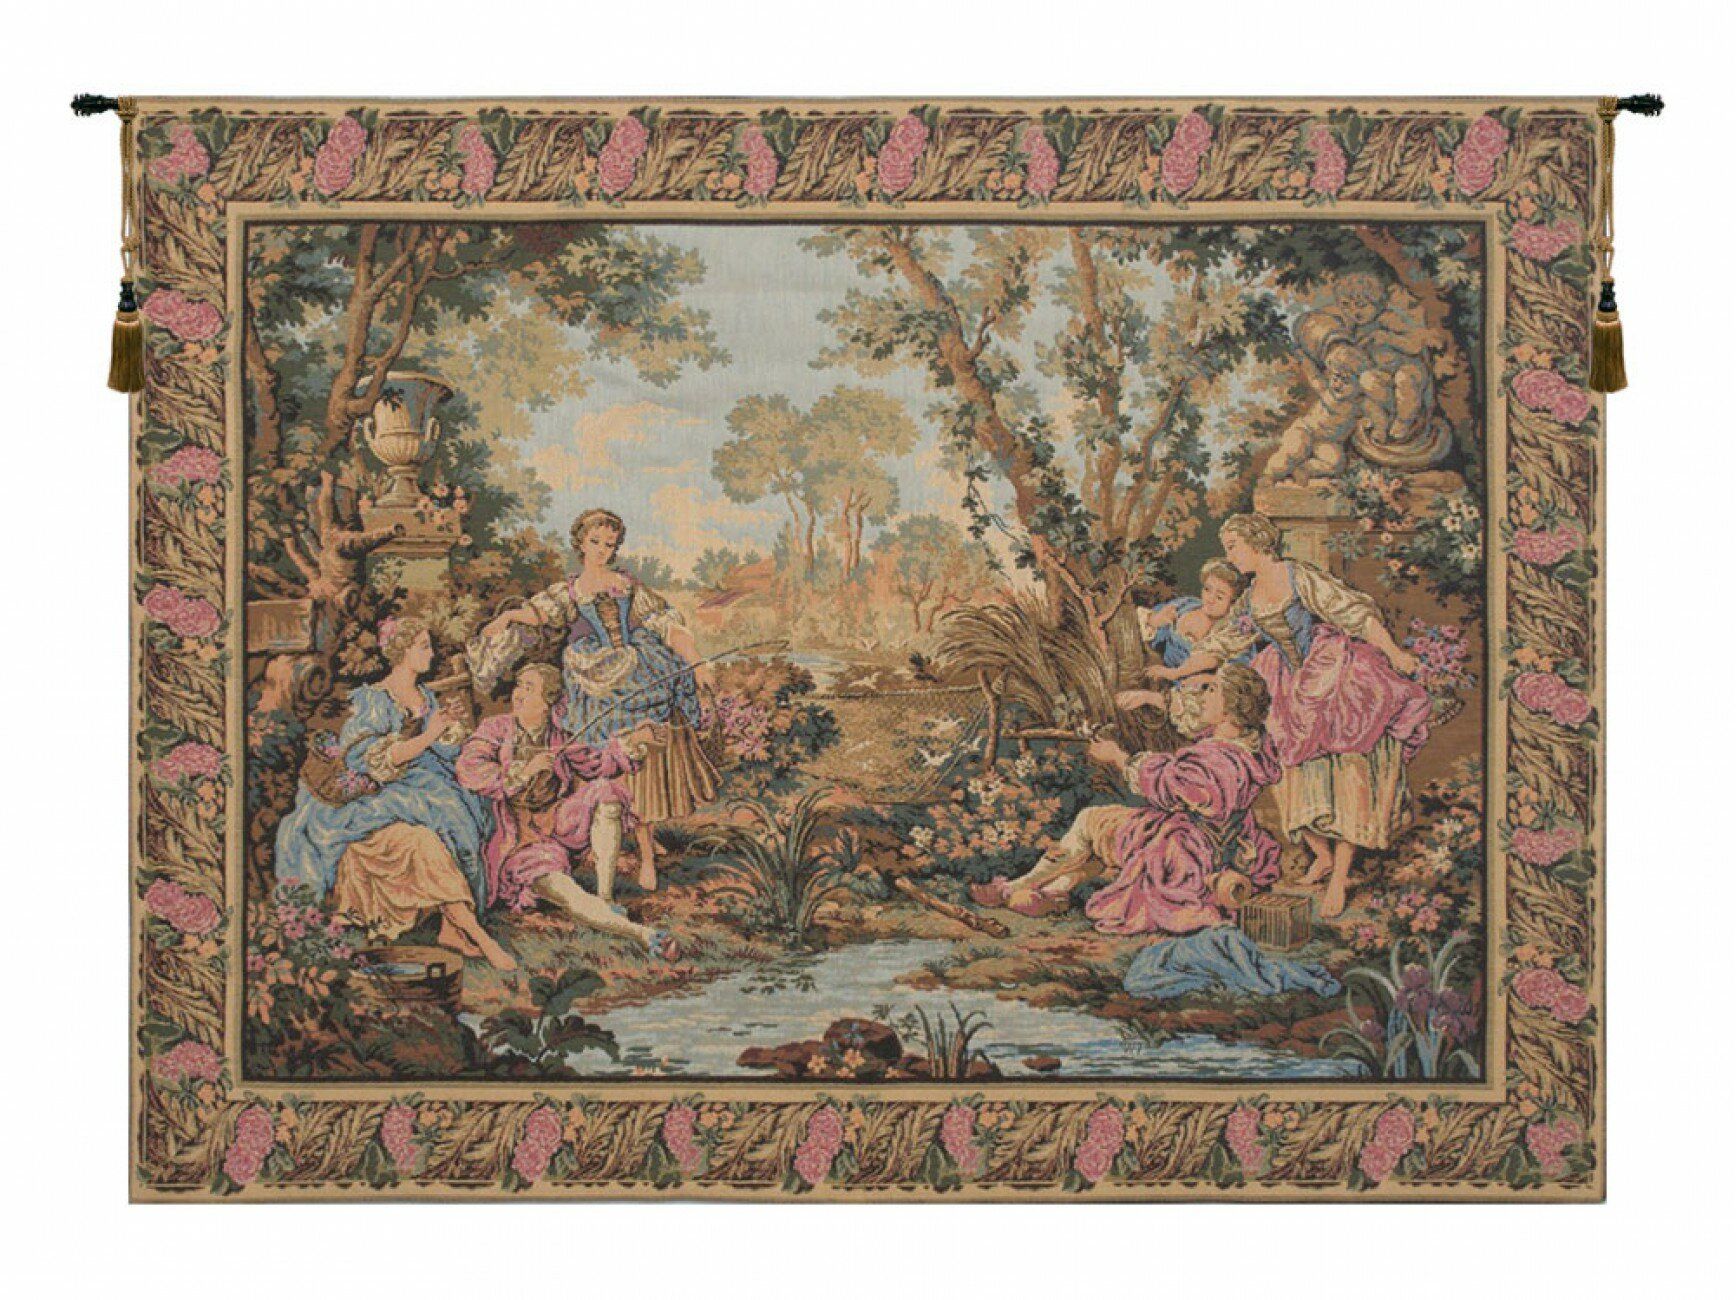 Gallanteries European Wall Hanging Pertaining To Most Current Blended Fabric Gallanteries European Wall Hangings (View 1 of 20)